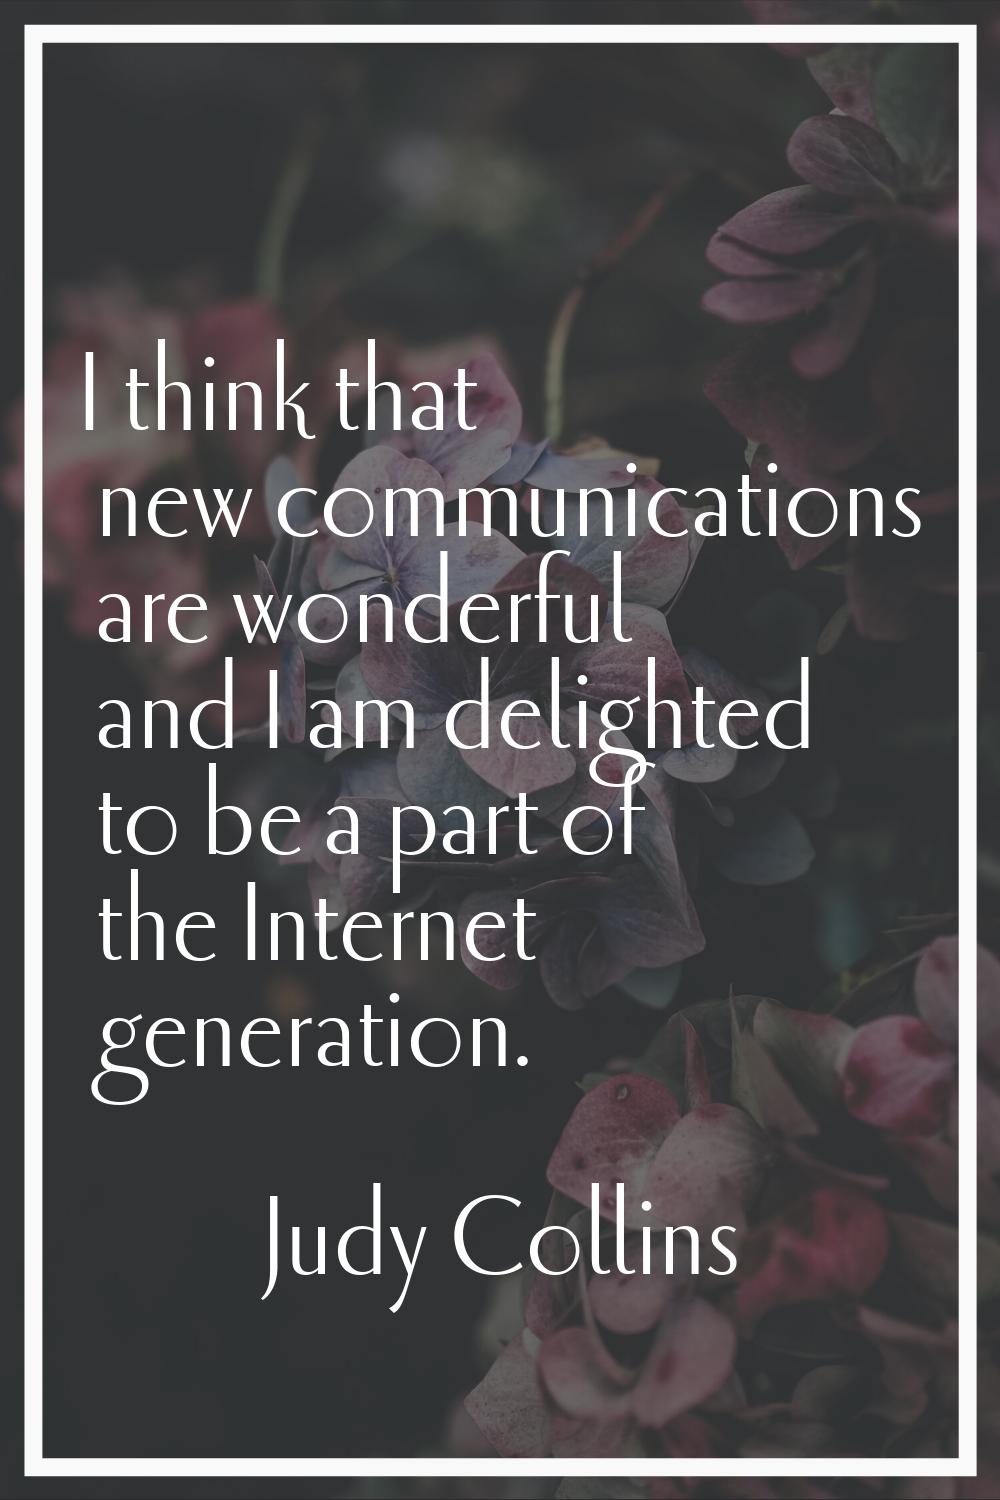 I think that new communications are wonderful and I am delighted to be a part of the Internet gener